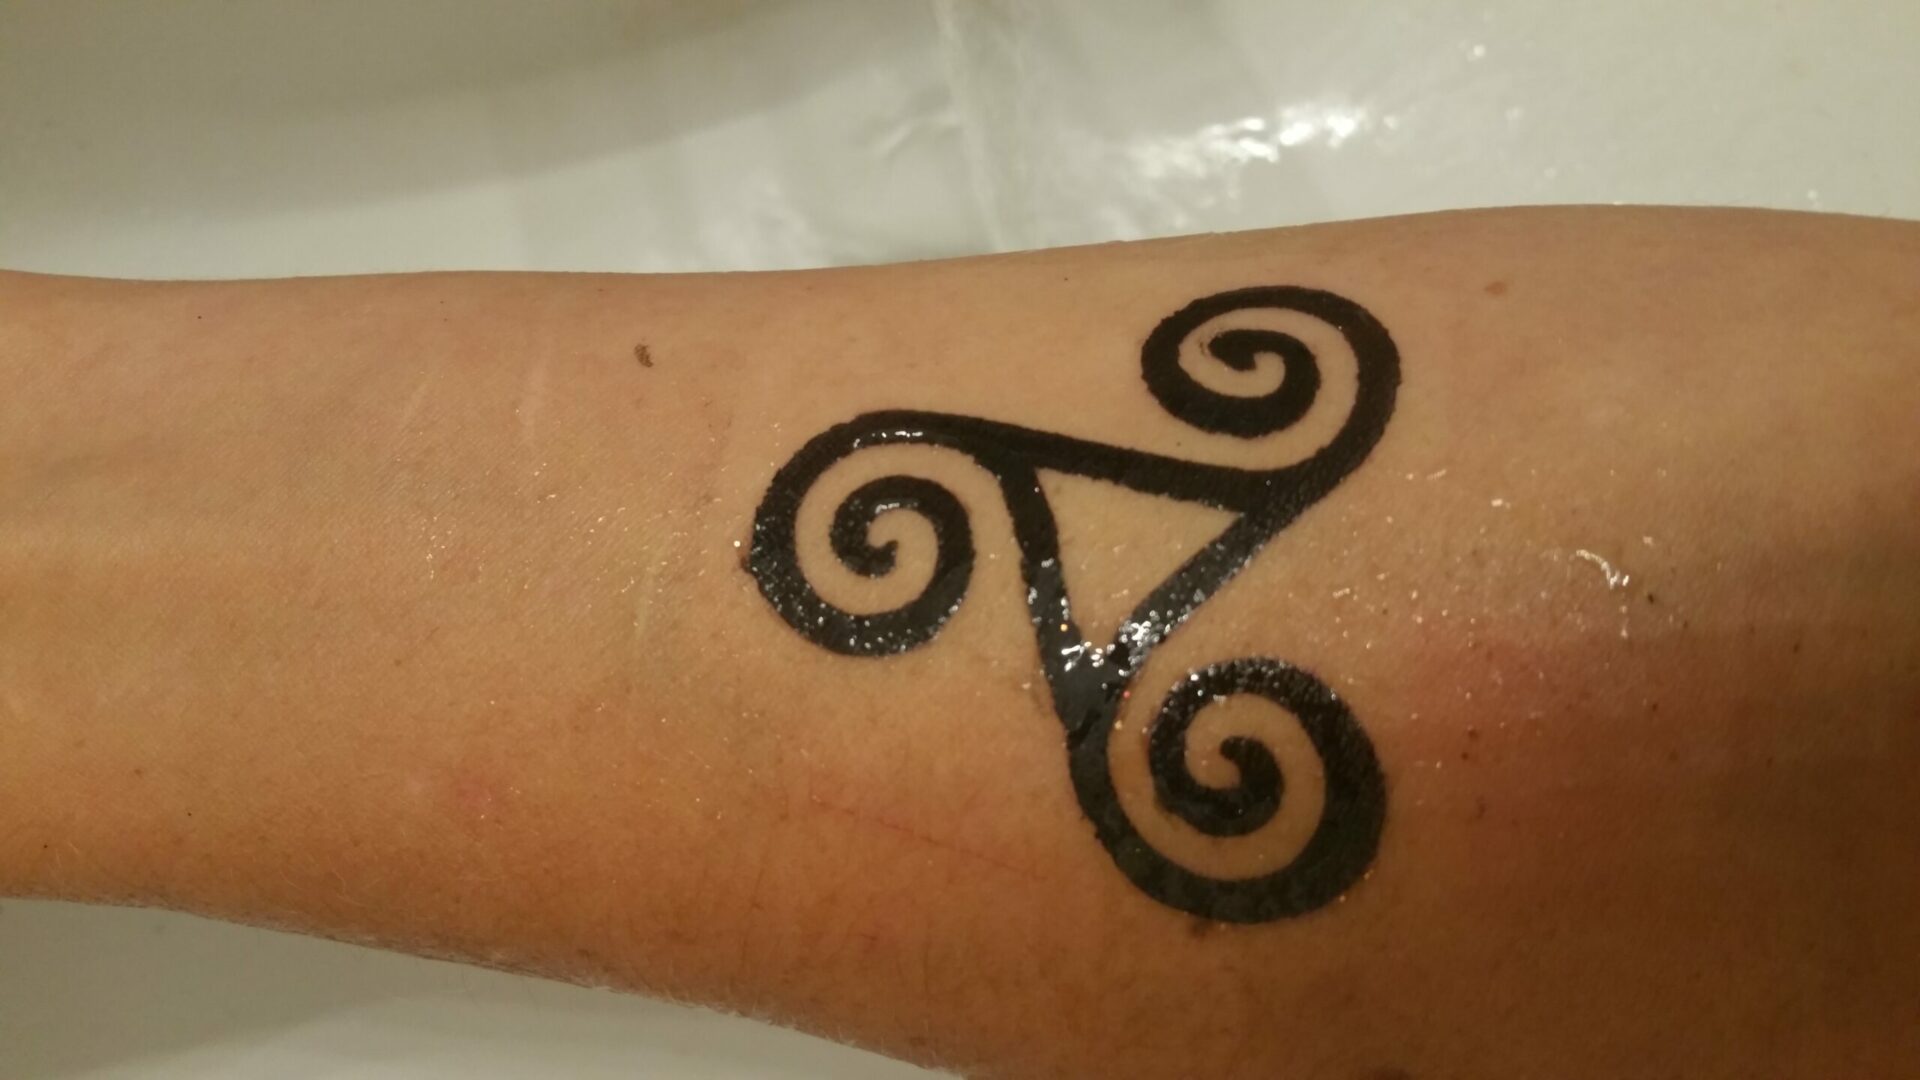 A tattoo of triskelion on the arm.